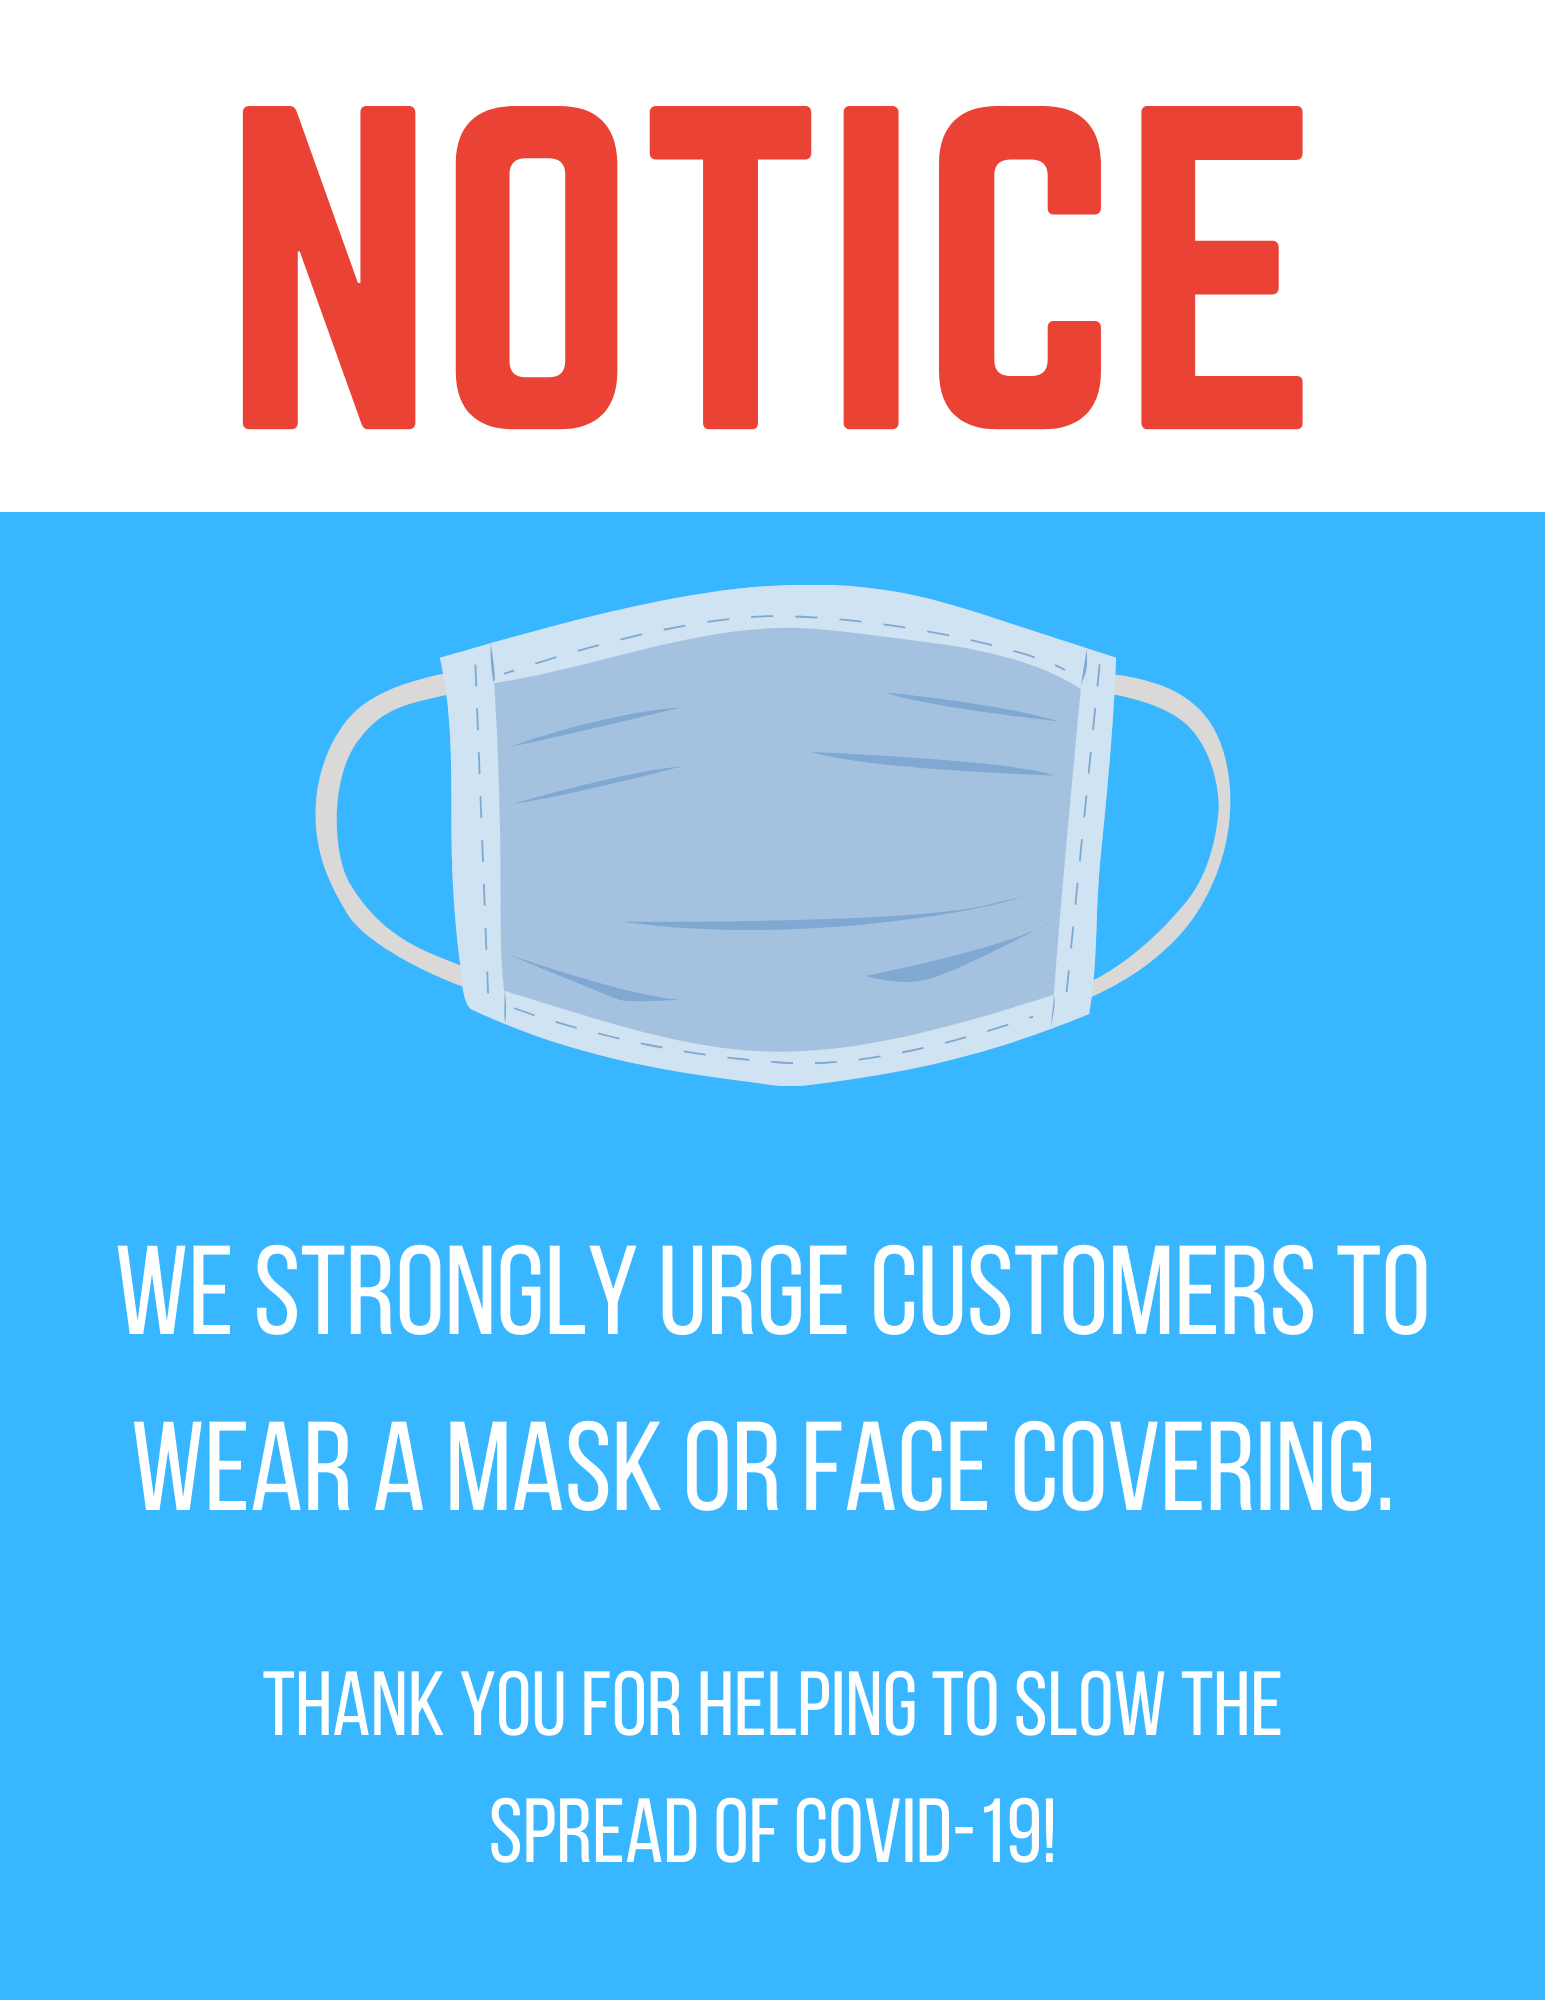 Masks Recommended Sign Printable